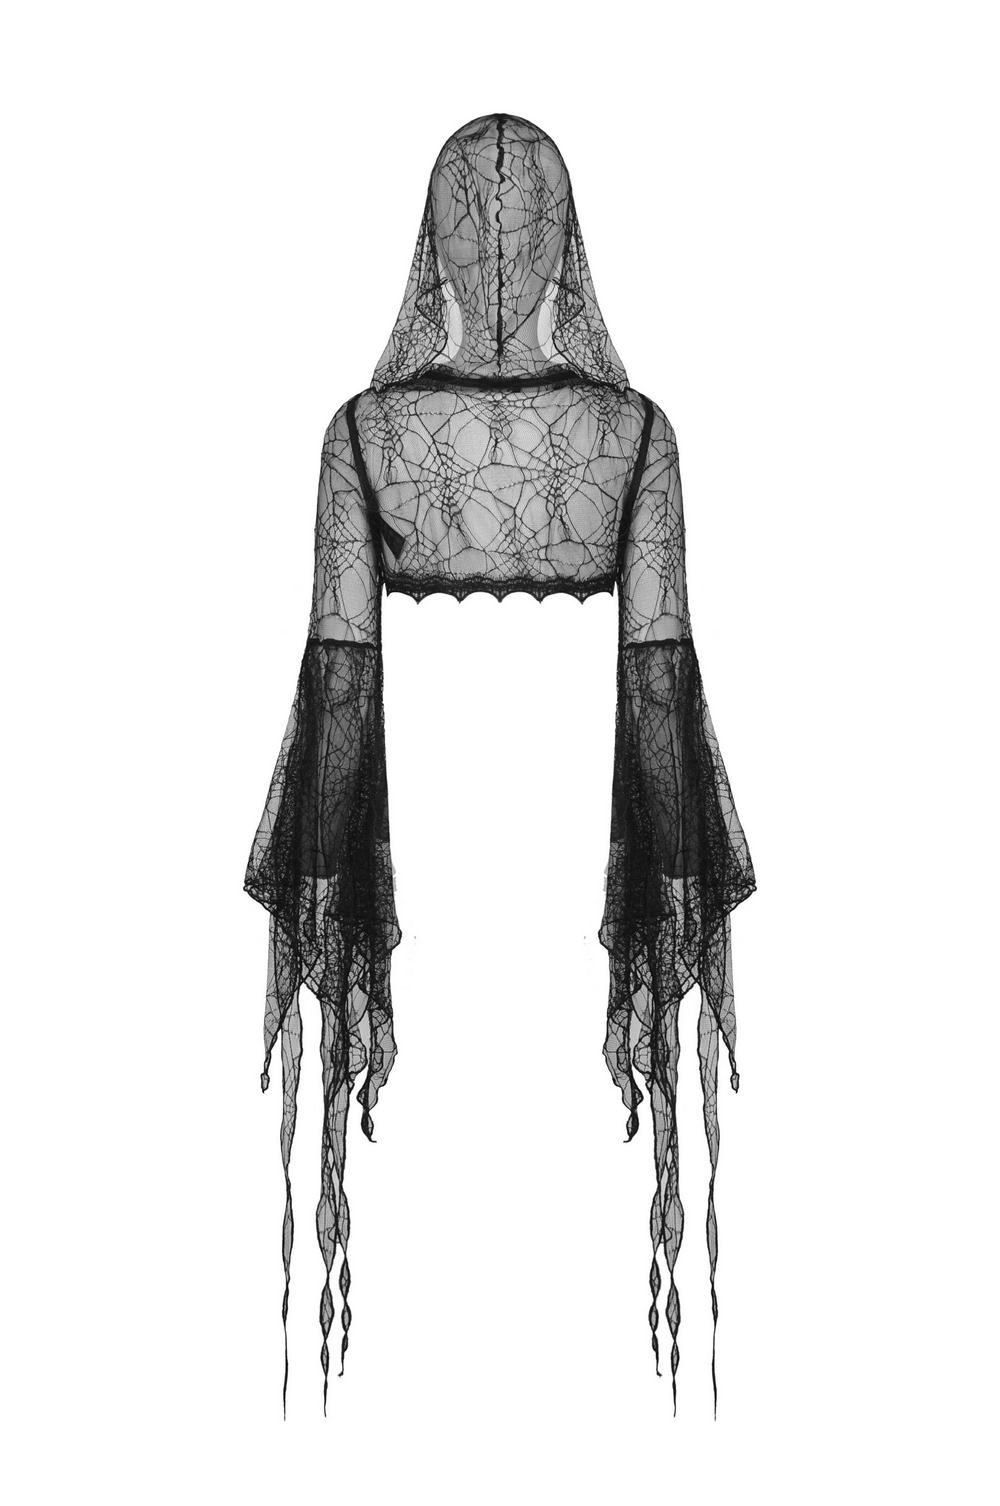 Gothic Women's Black Sheer Delicate Lace Hooded Cape